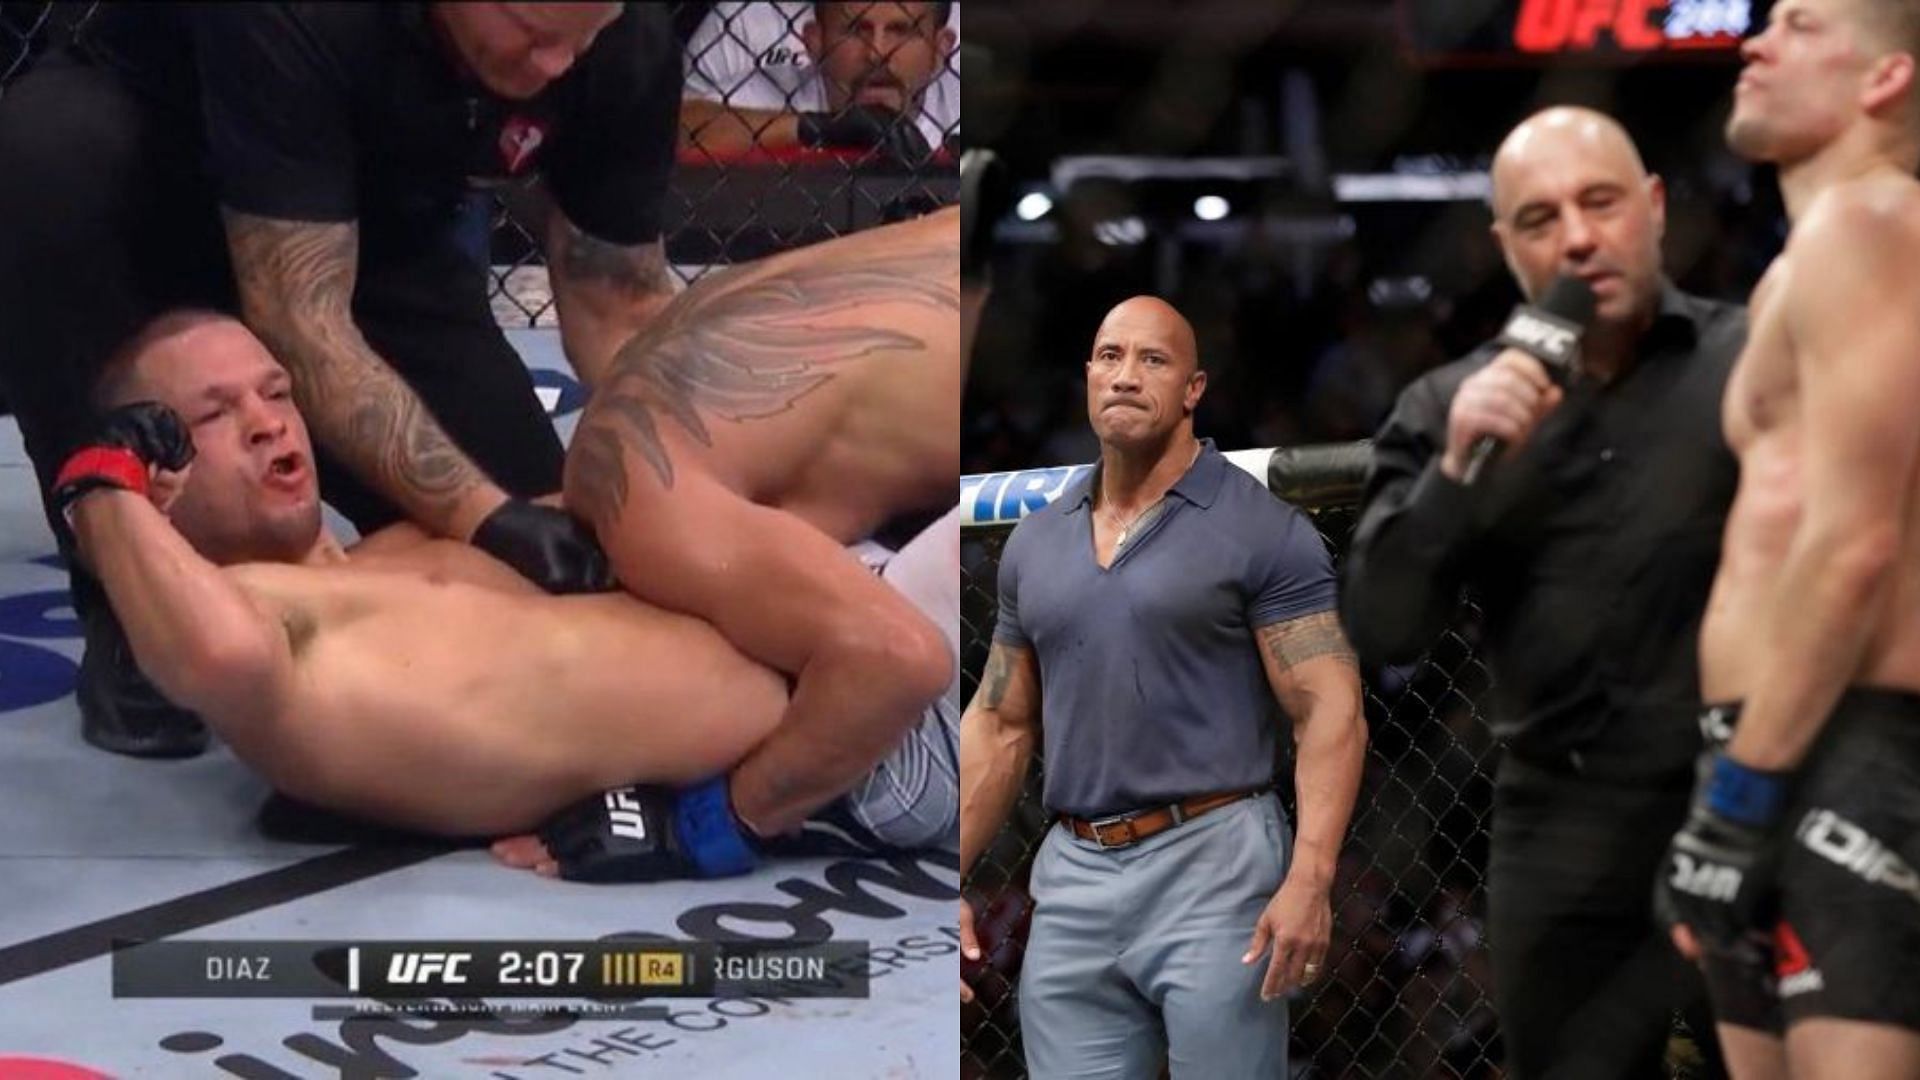 Nate Diaz and The Rock are no strangers to each other